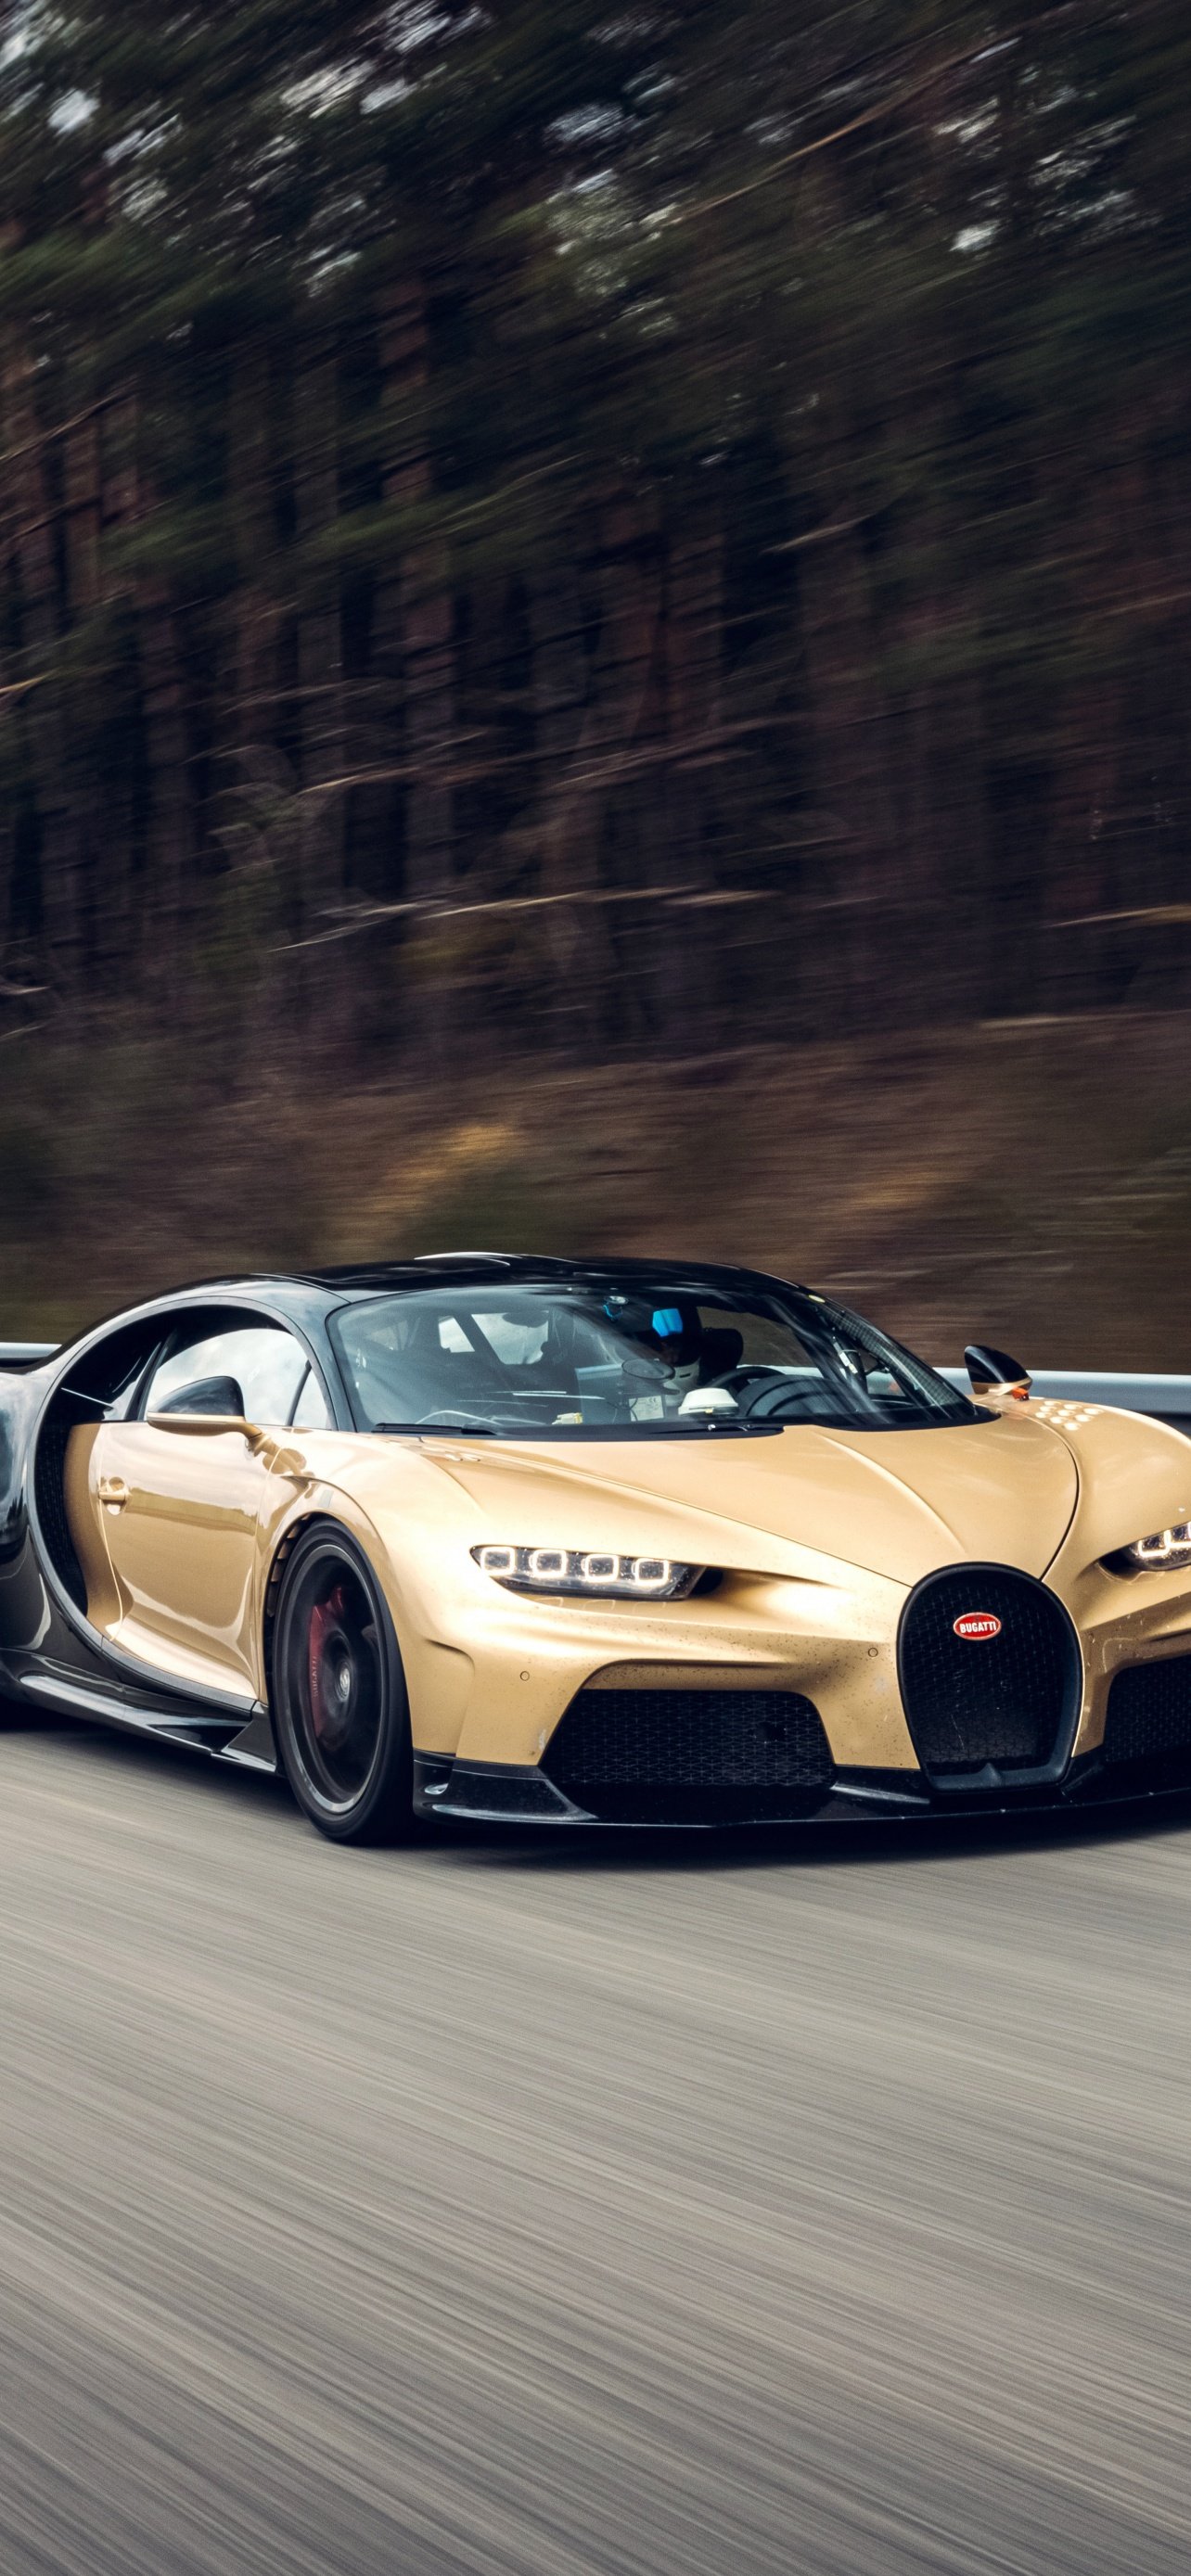 Download The Luxurious Gold Bugatti Veyron Car Wallpaper | Wallpapers.com